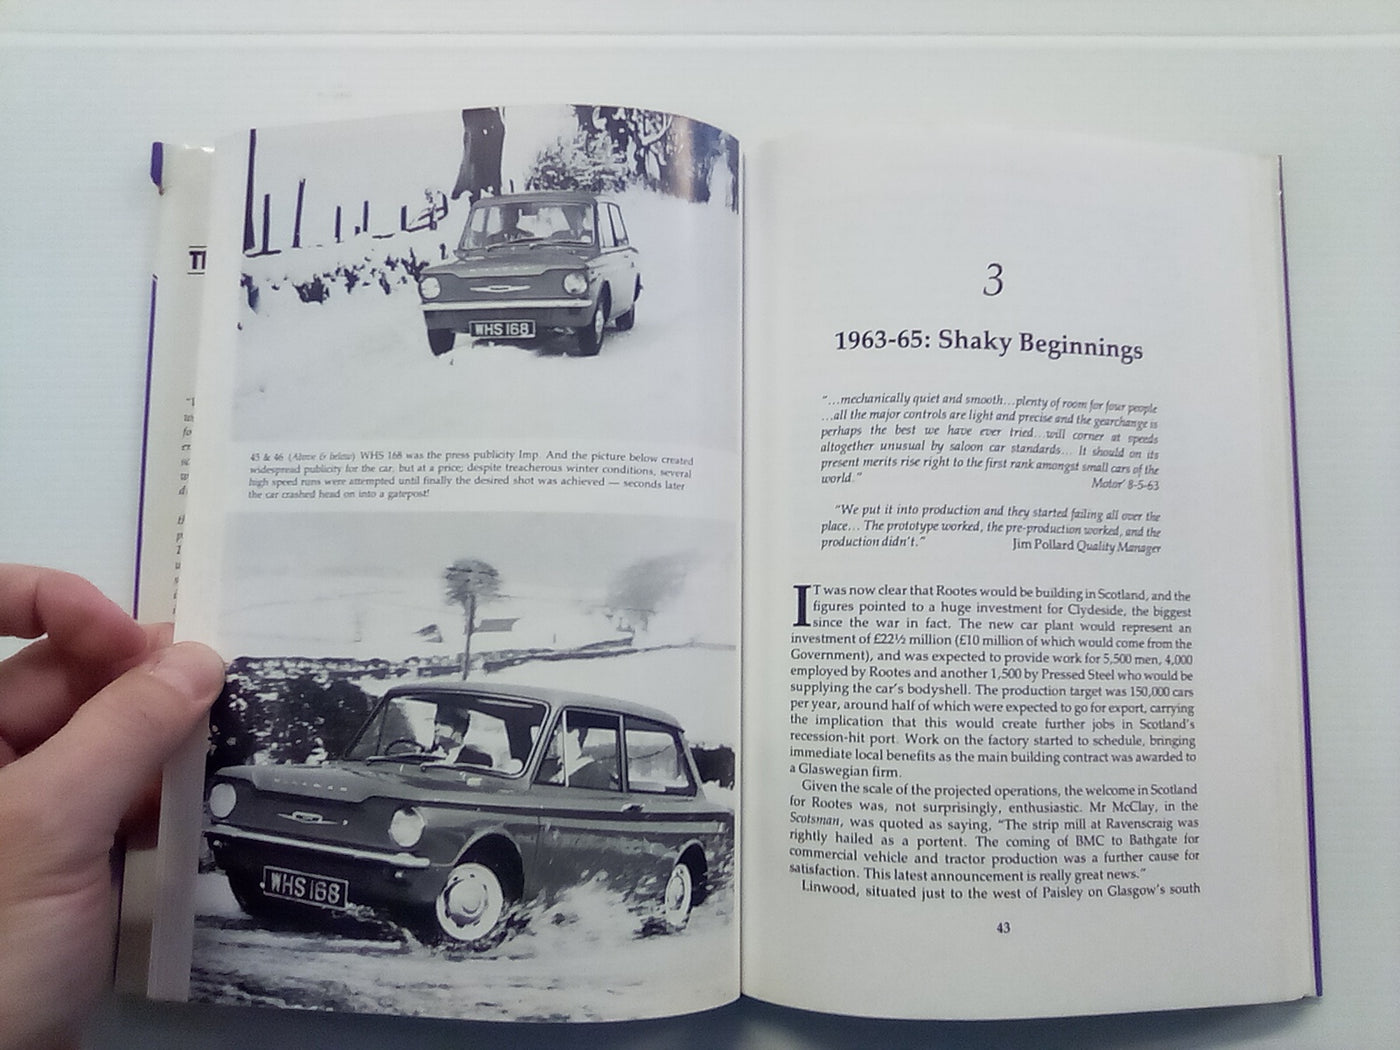 Apex - The Inside Story of the Hillman Imp by David & Peter Henshaw